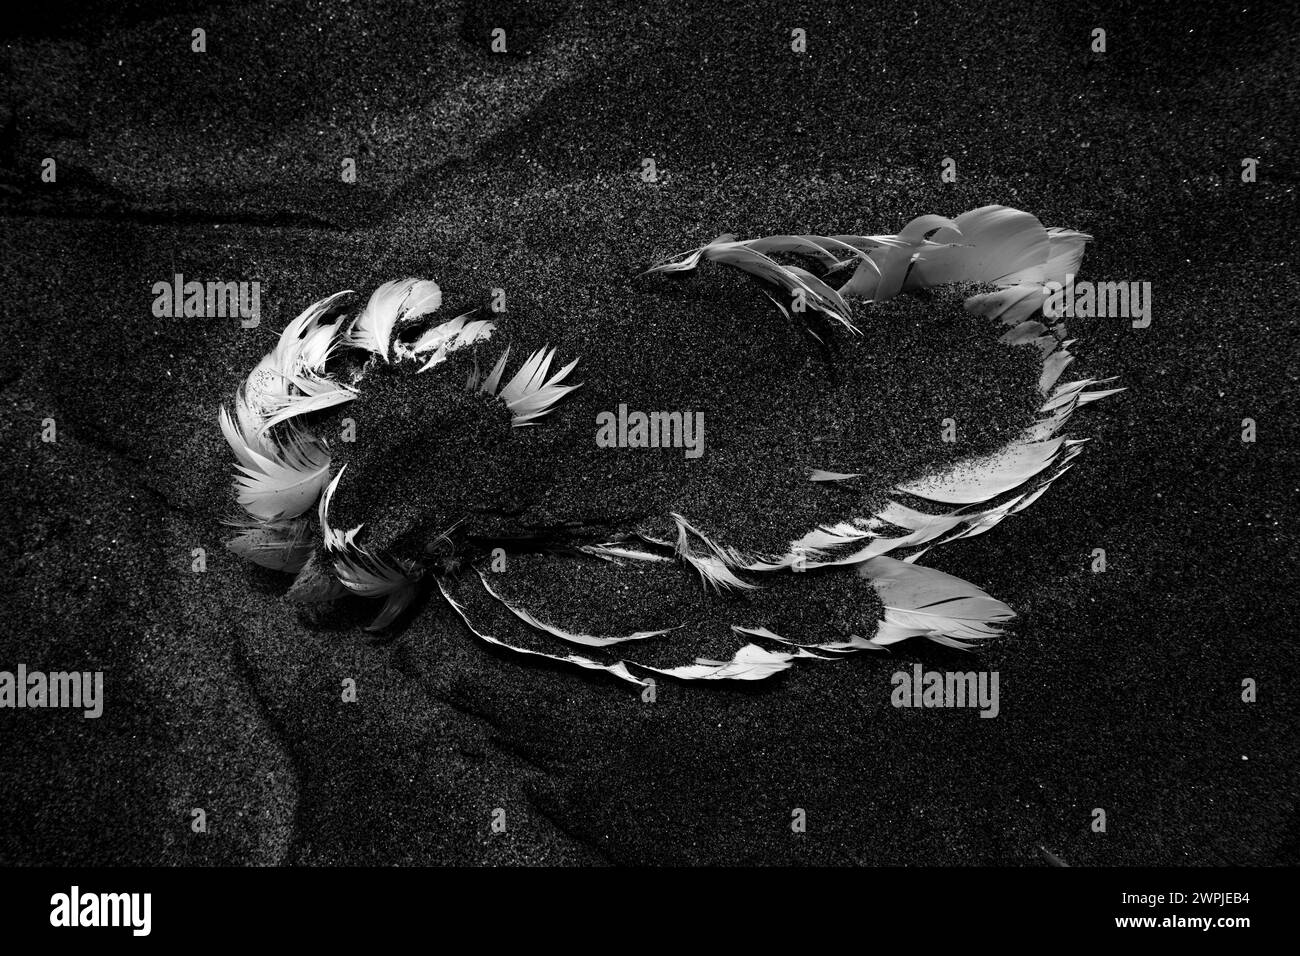 Graphic resource: Fallen angel. A white bird wing half buried in black sand enhanced by a monochrome rendering. Stock Photo